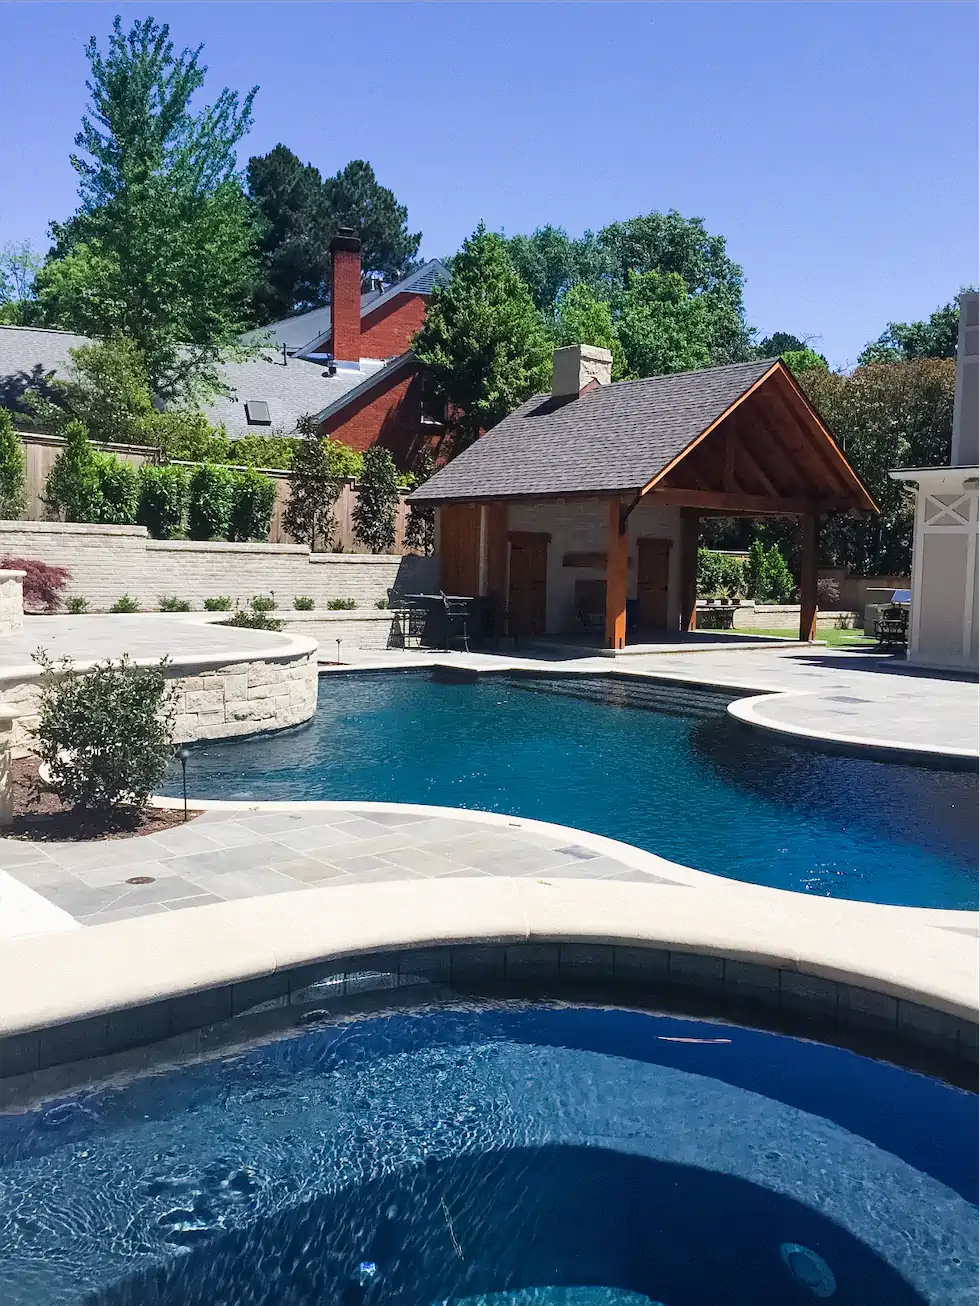 custom gunite hot tub, custom gunite swimming pool, and outdoor living space with large pergola and outdoor kitchen and fire pit by Ogden Pools in Memphis, TN